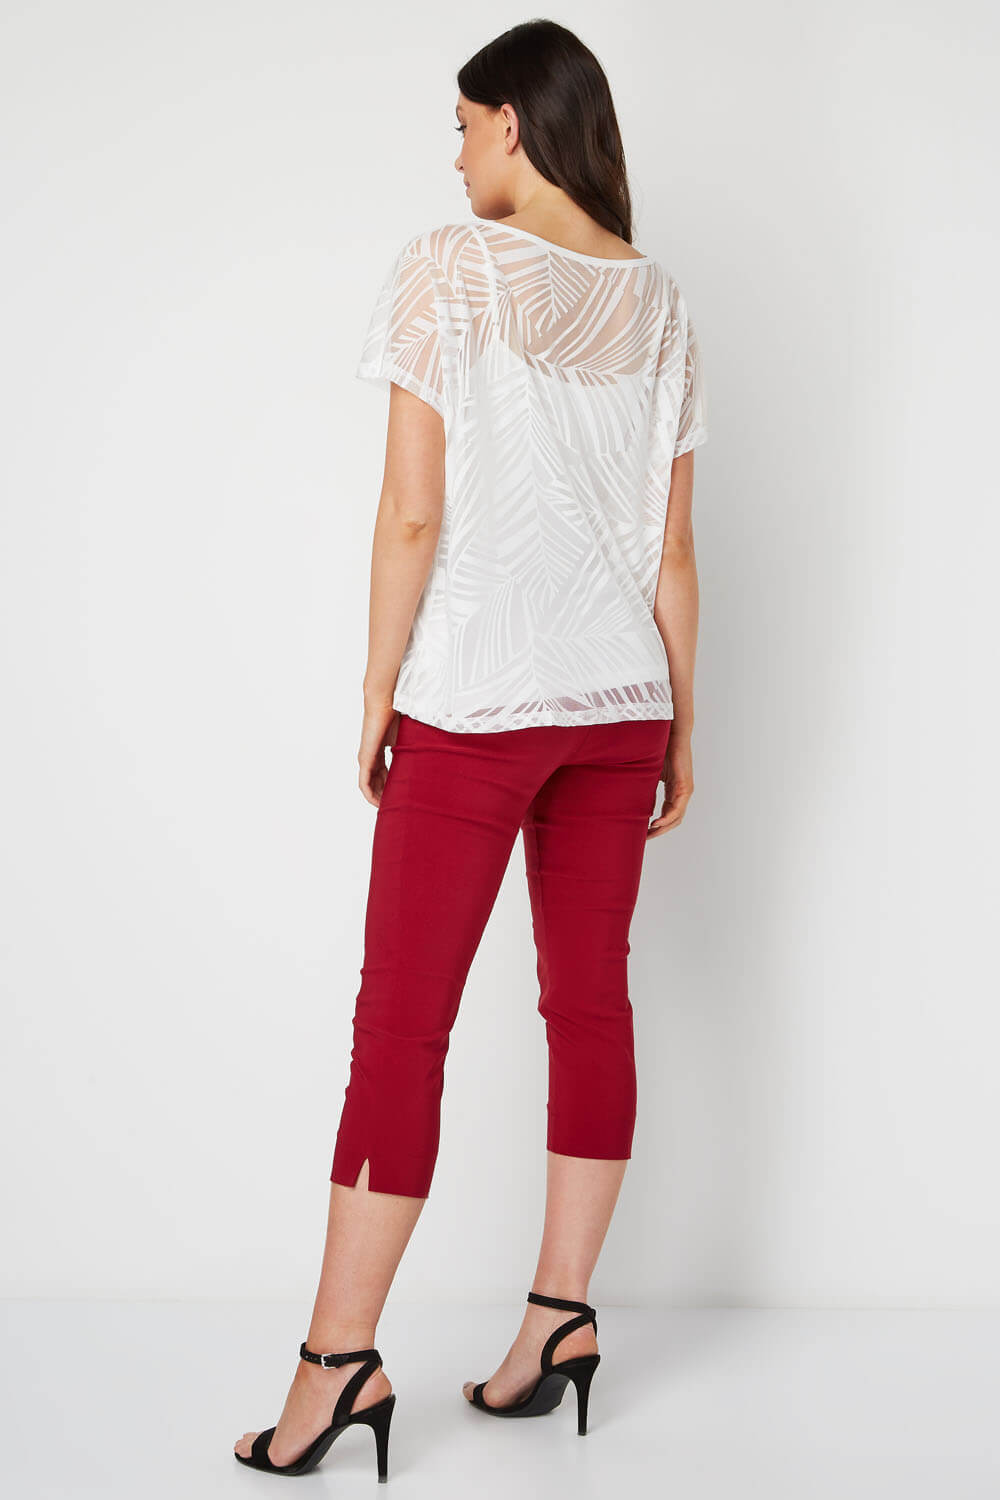 Ivory  Burnout Overlay Top, Image 2 of 8